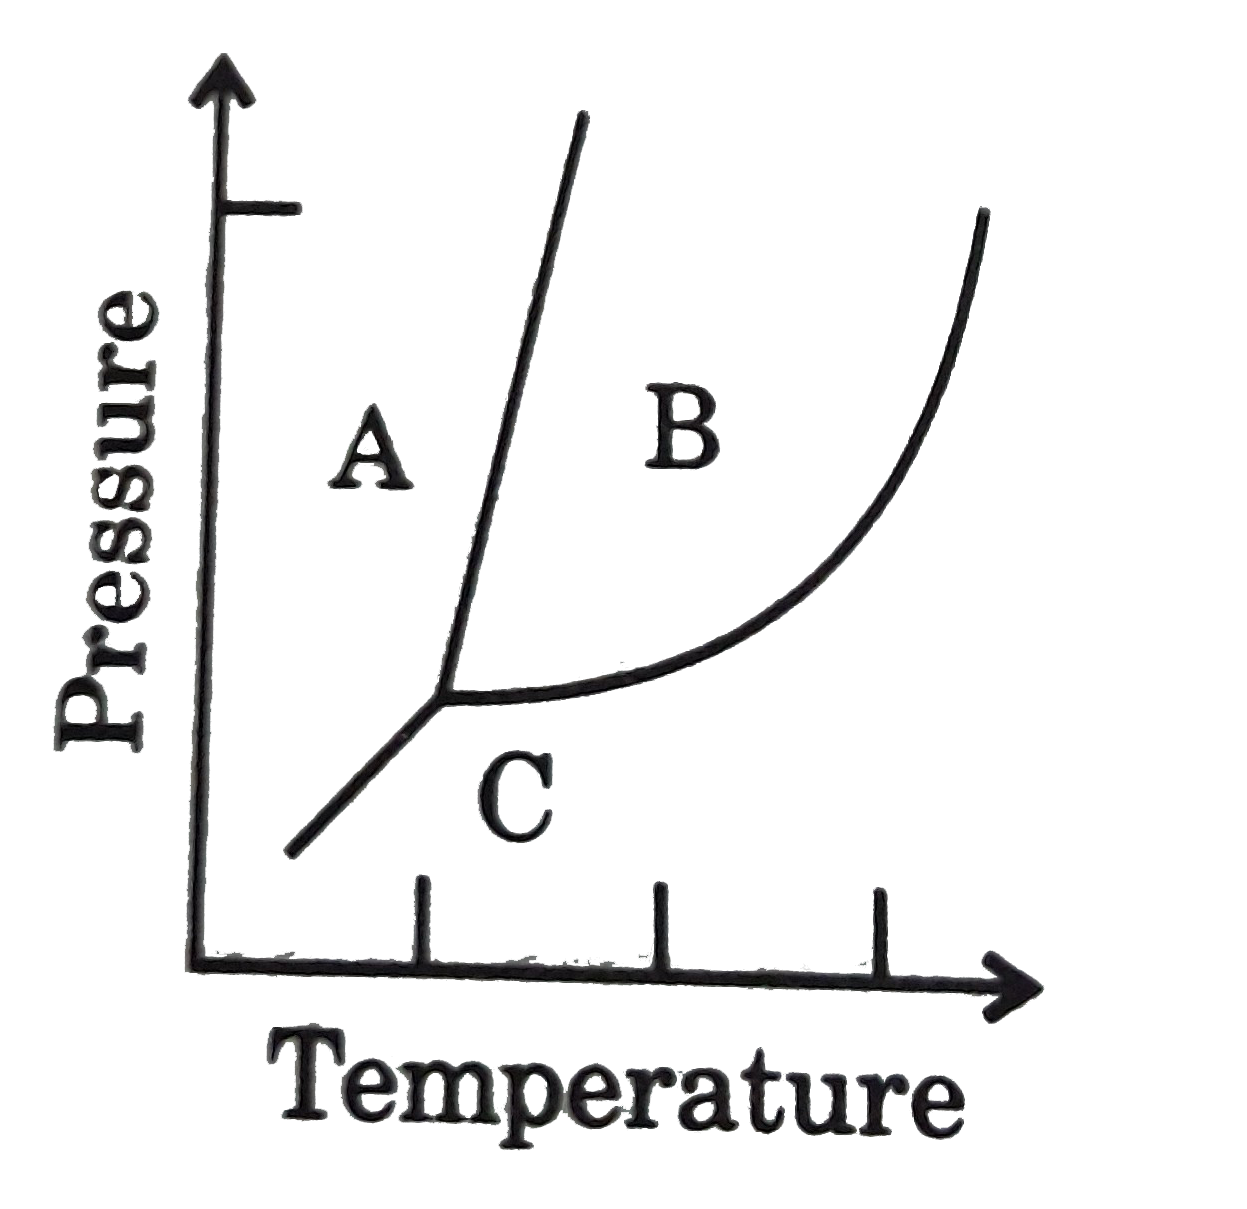 Under certain conditions, CO(2) melts rather than sublimes, CO(2) which transition in the phase diagram does this change correspond ?